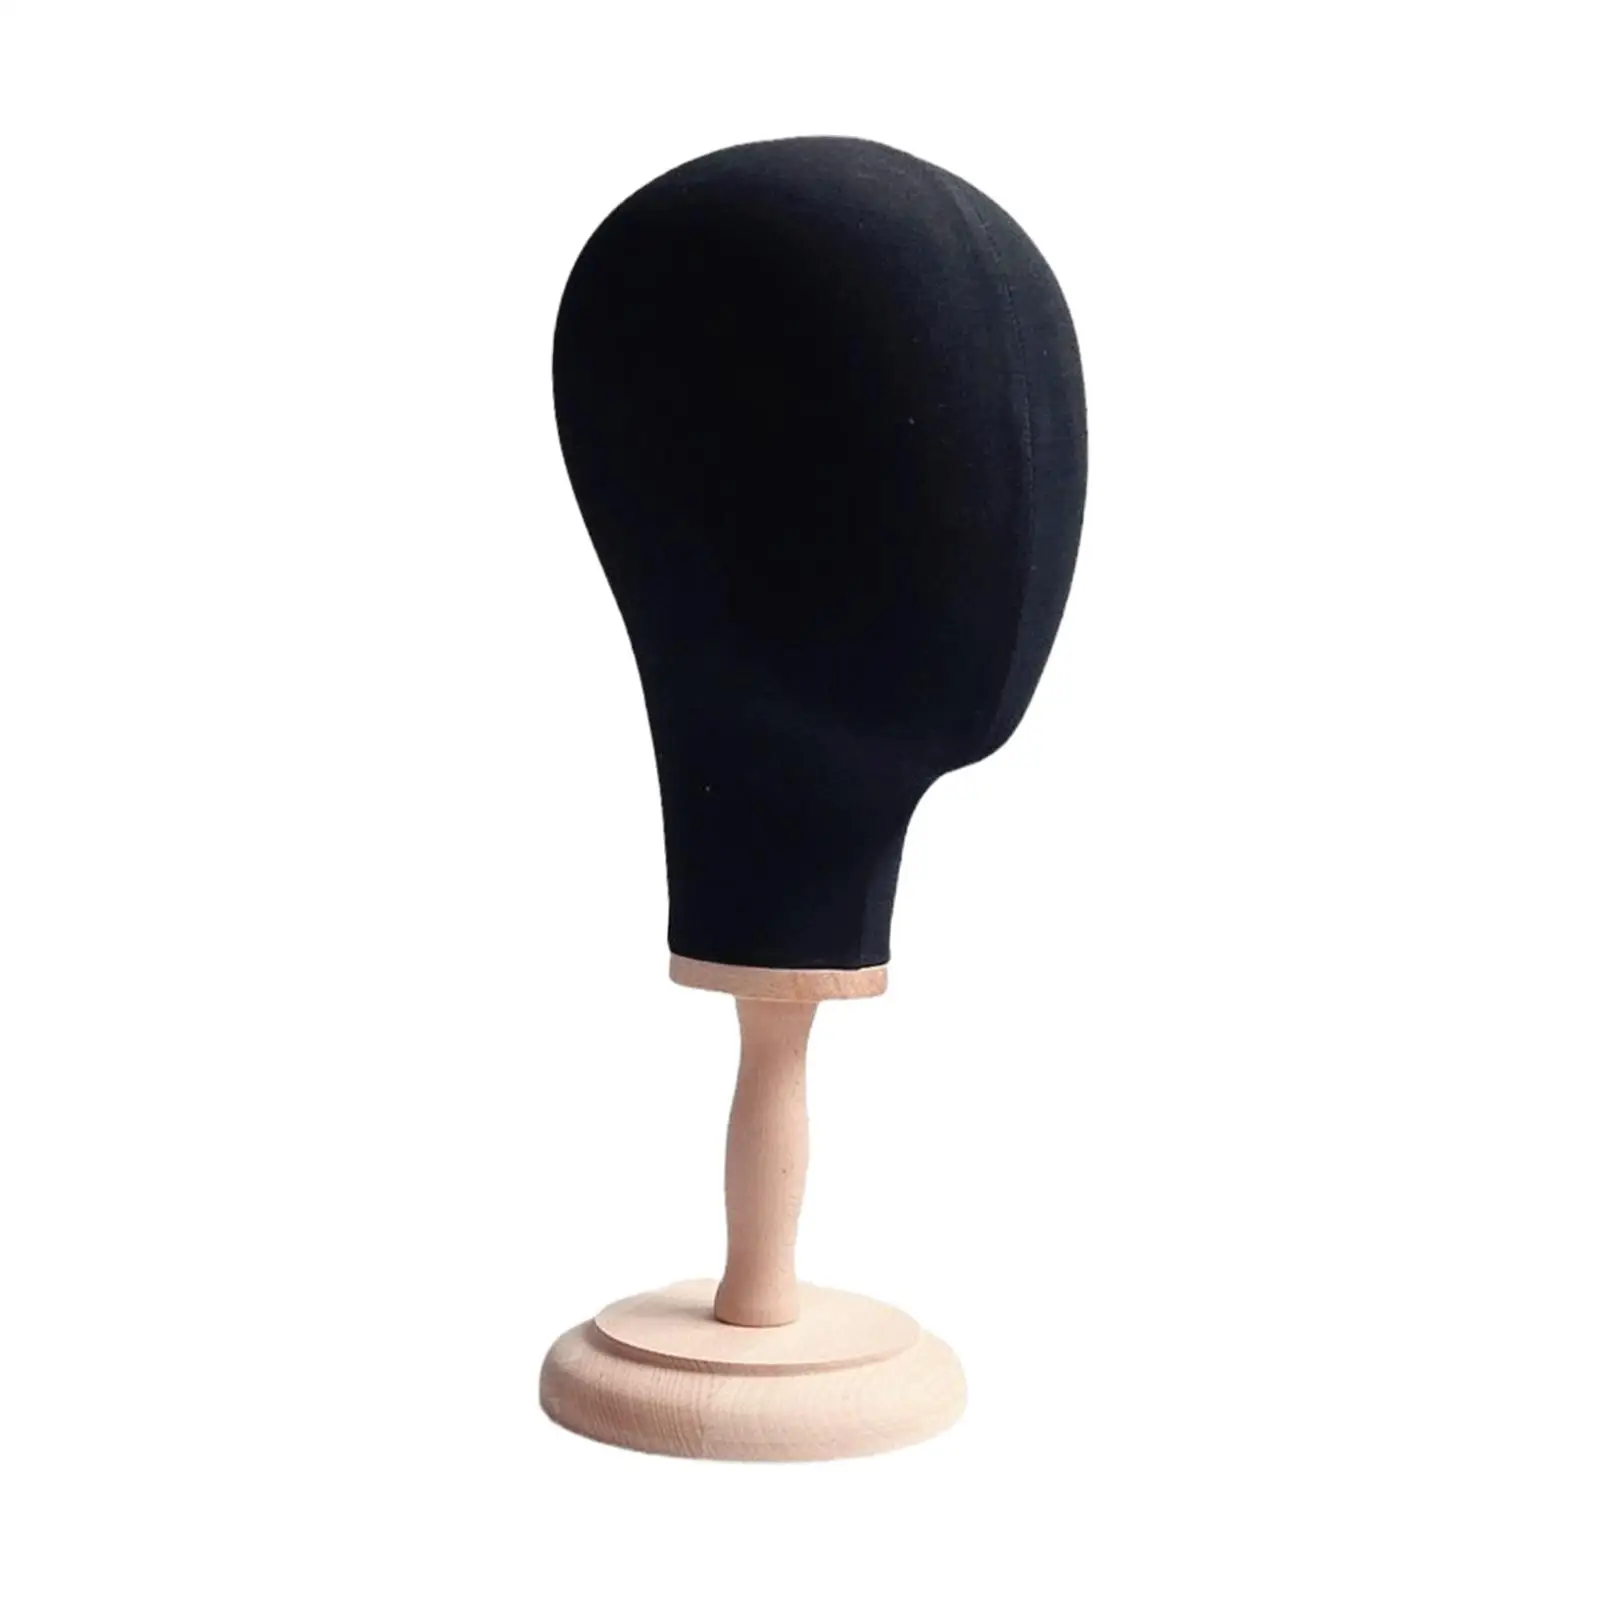 

Mannequin Head Model Display Hair Hats Hairpieces Wig Hat Display Holder for Hairdresser Training Beginner Home Salon Shop Props